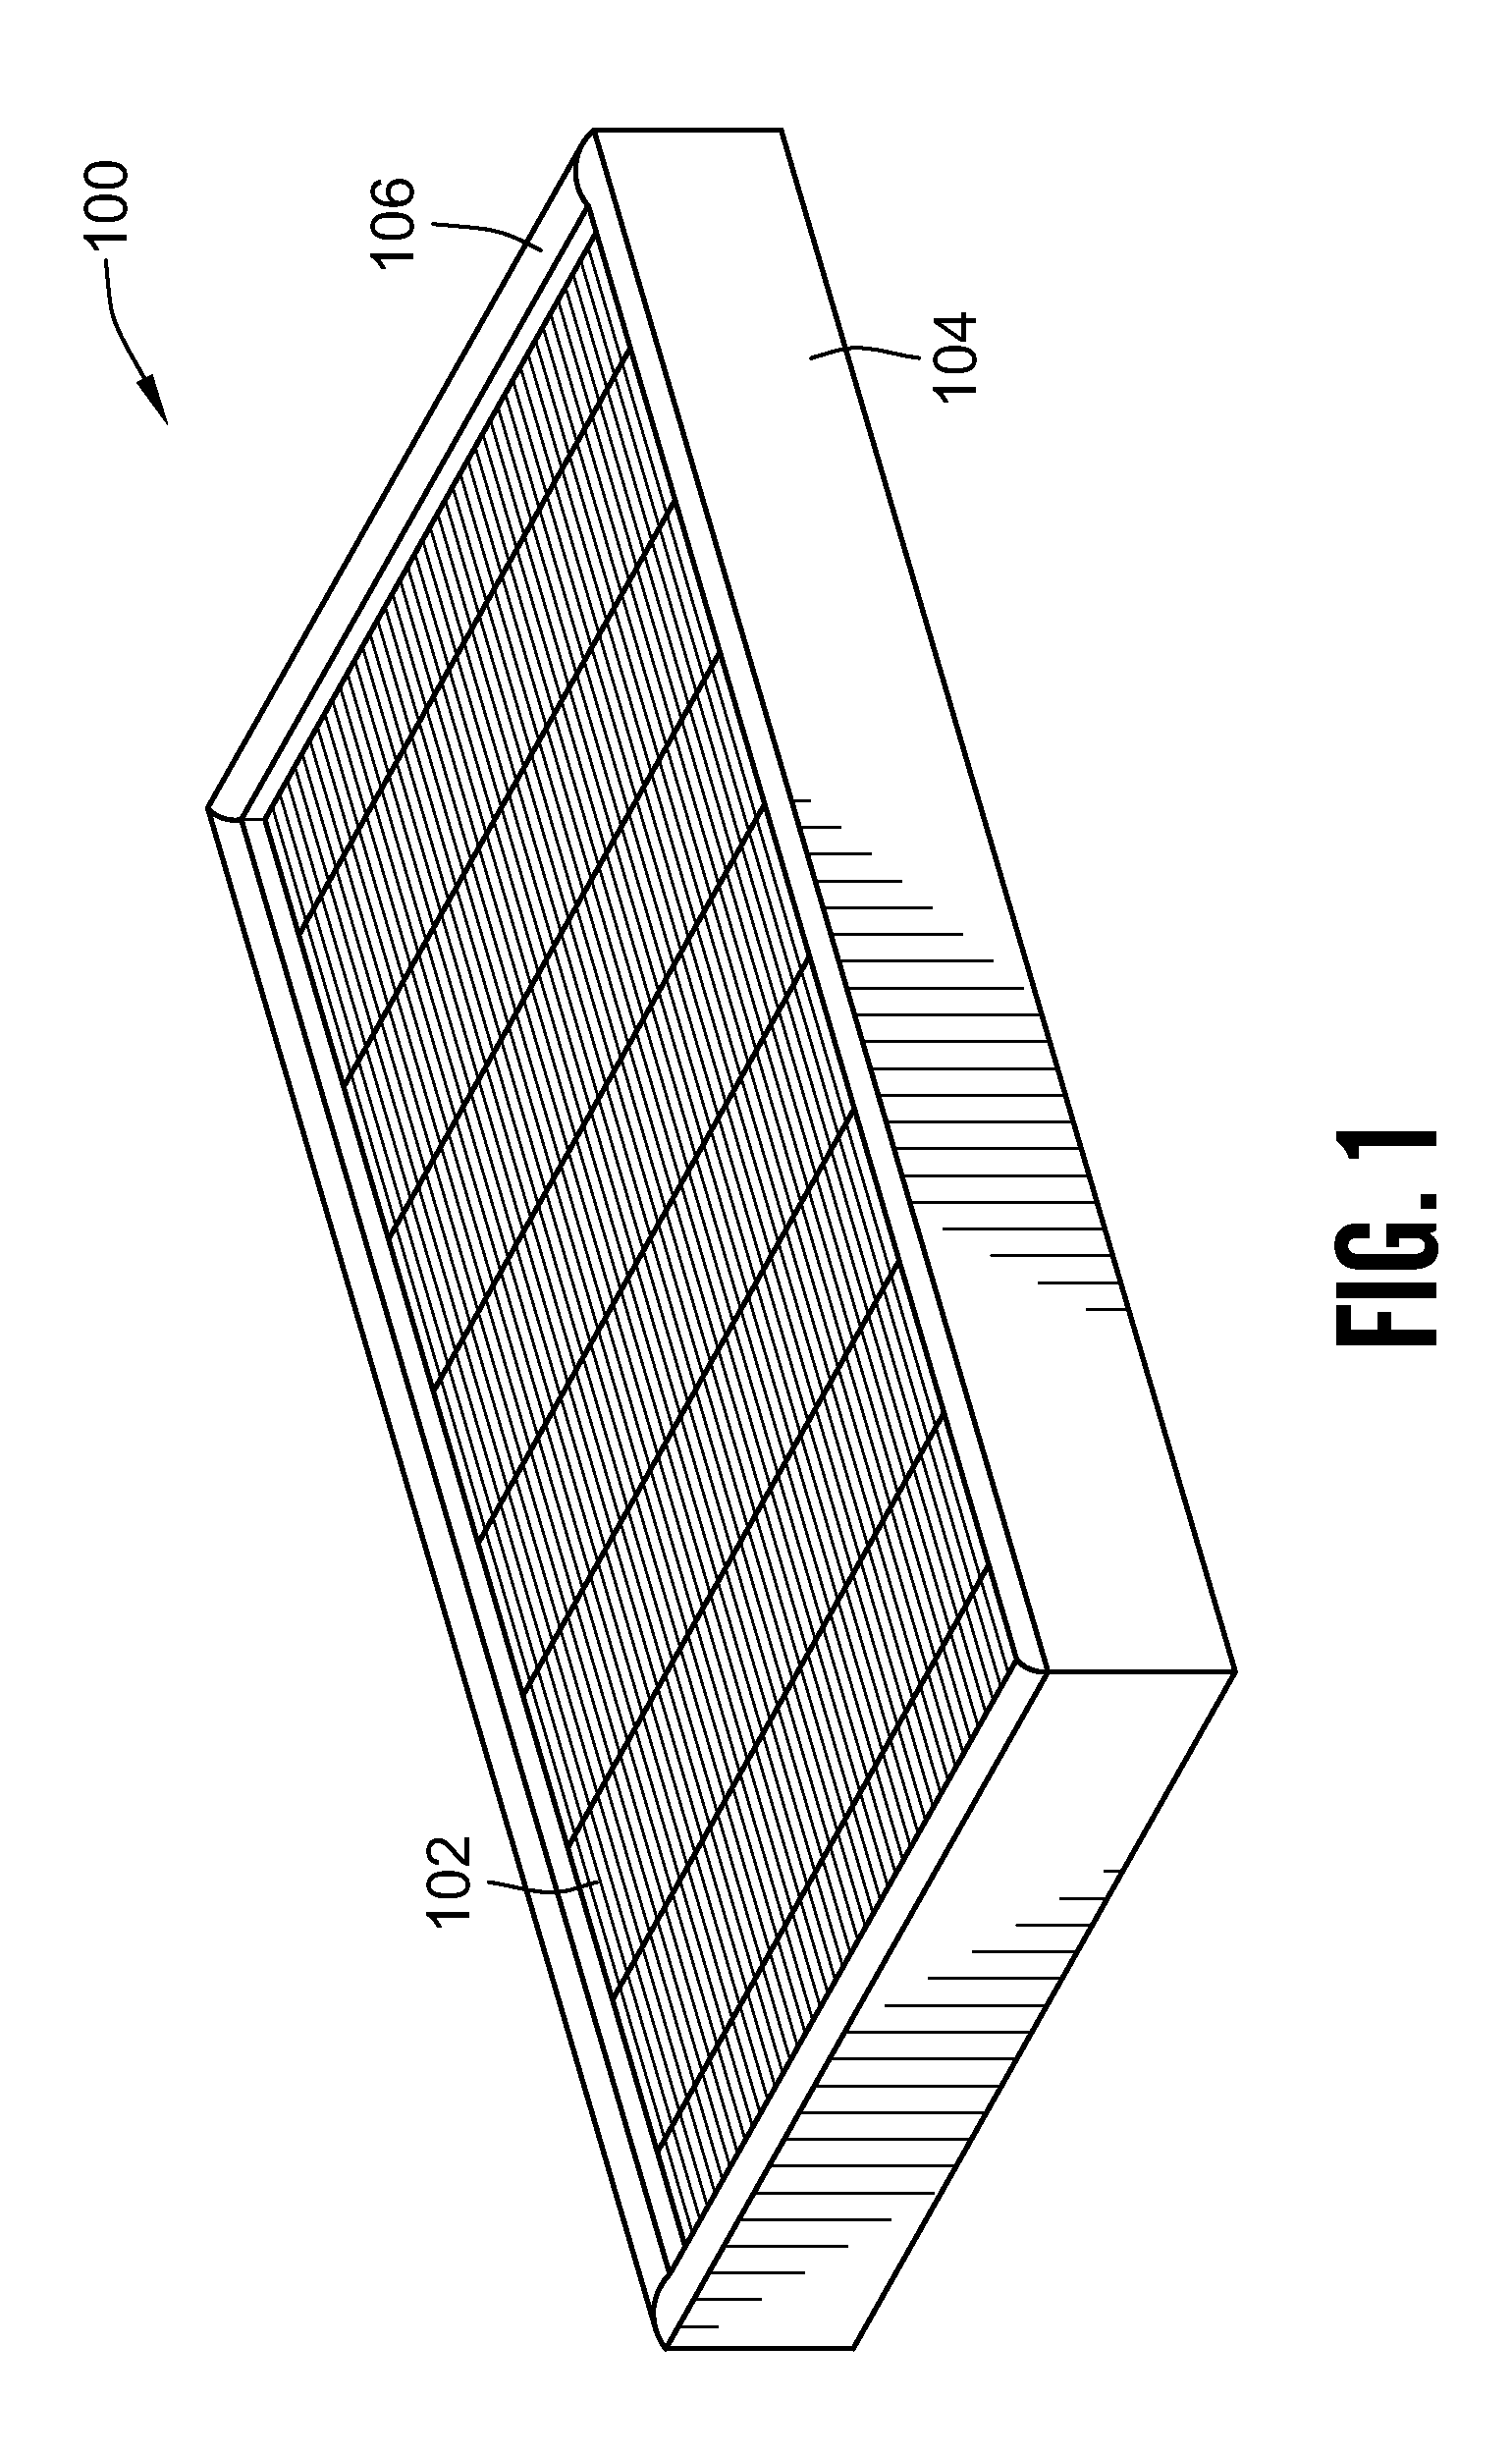 Air cooling system incorporating membrane-free filter and/or integral framing for filter